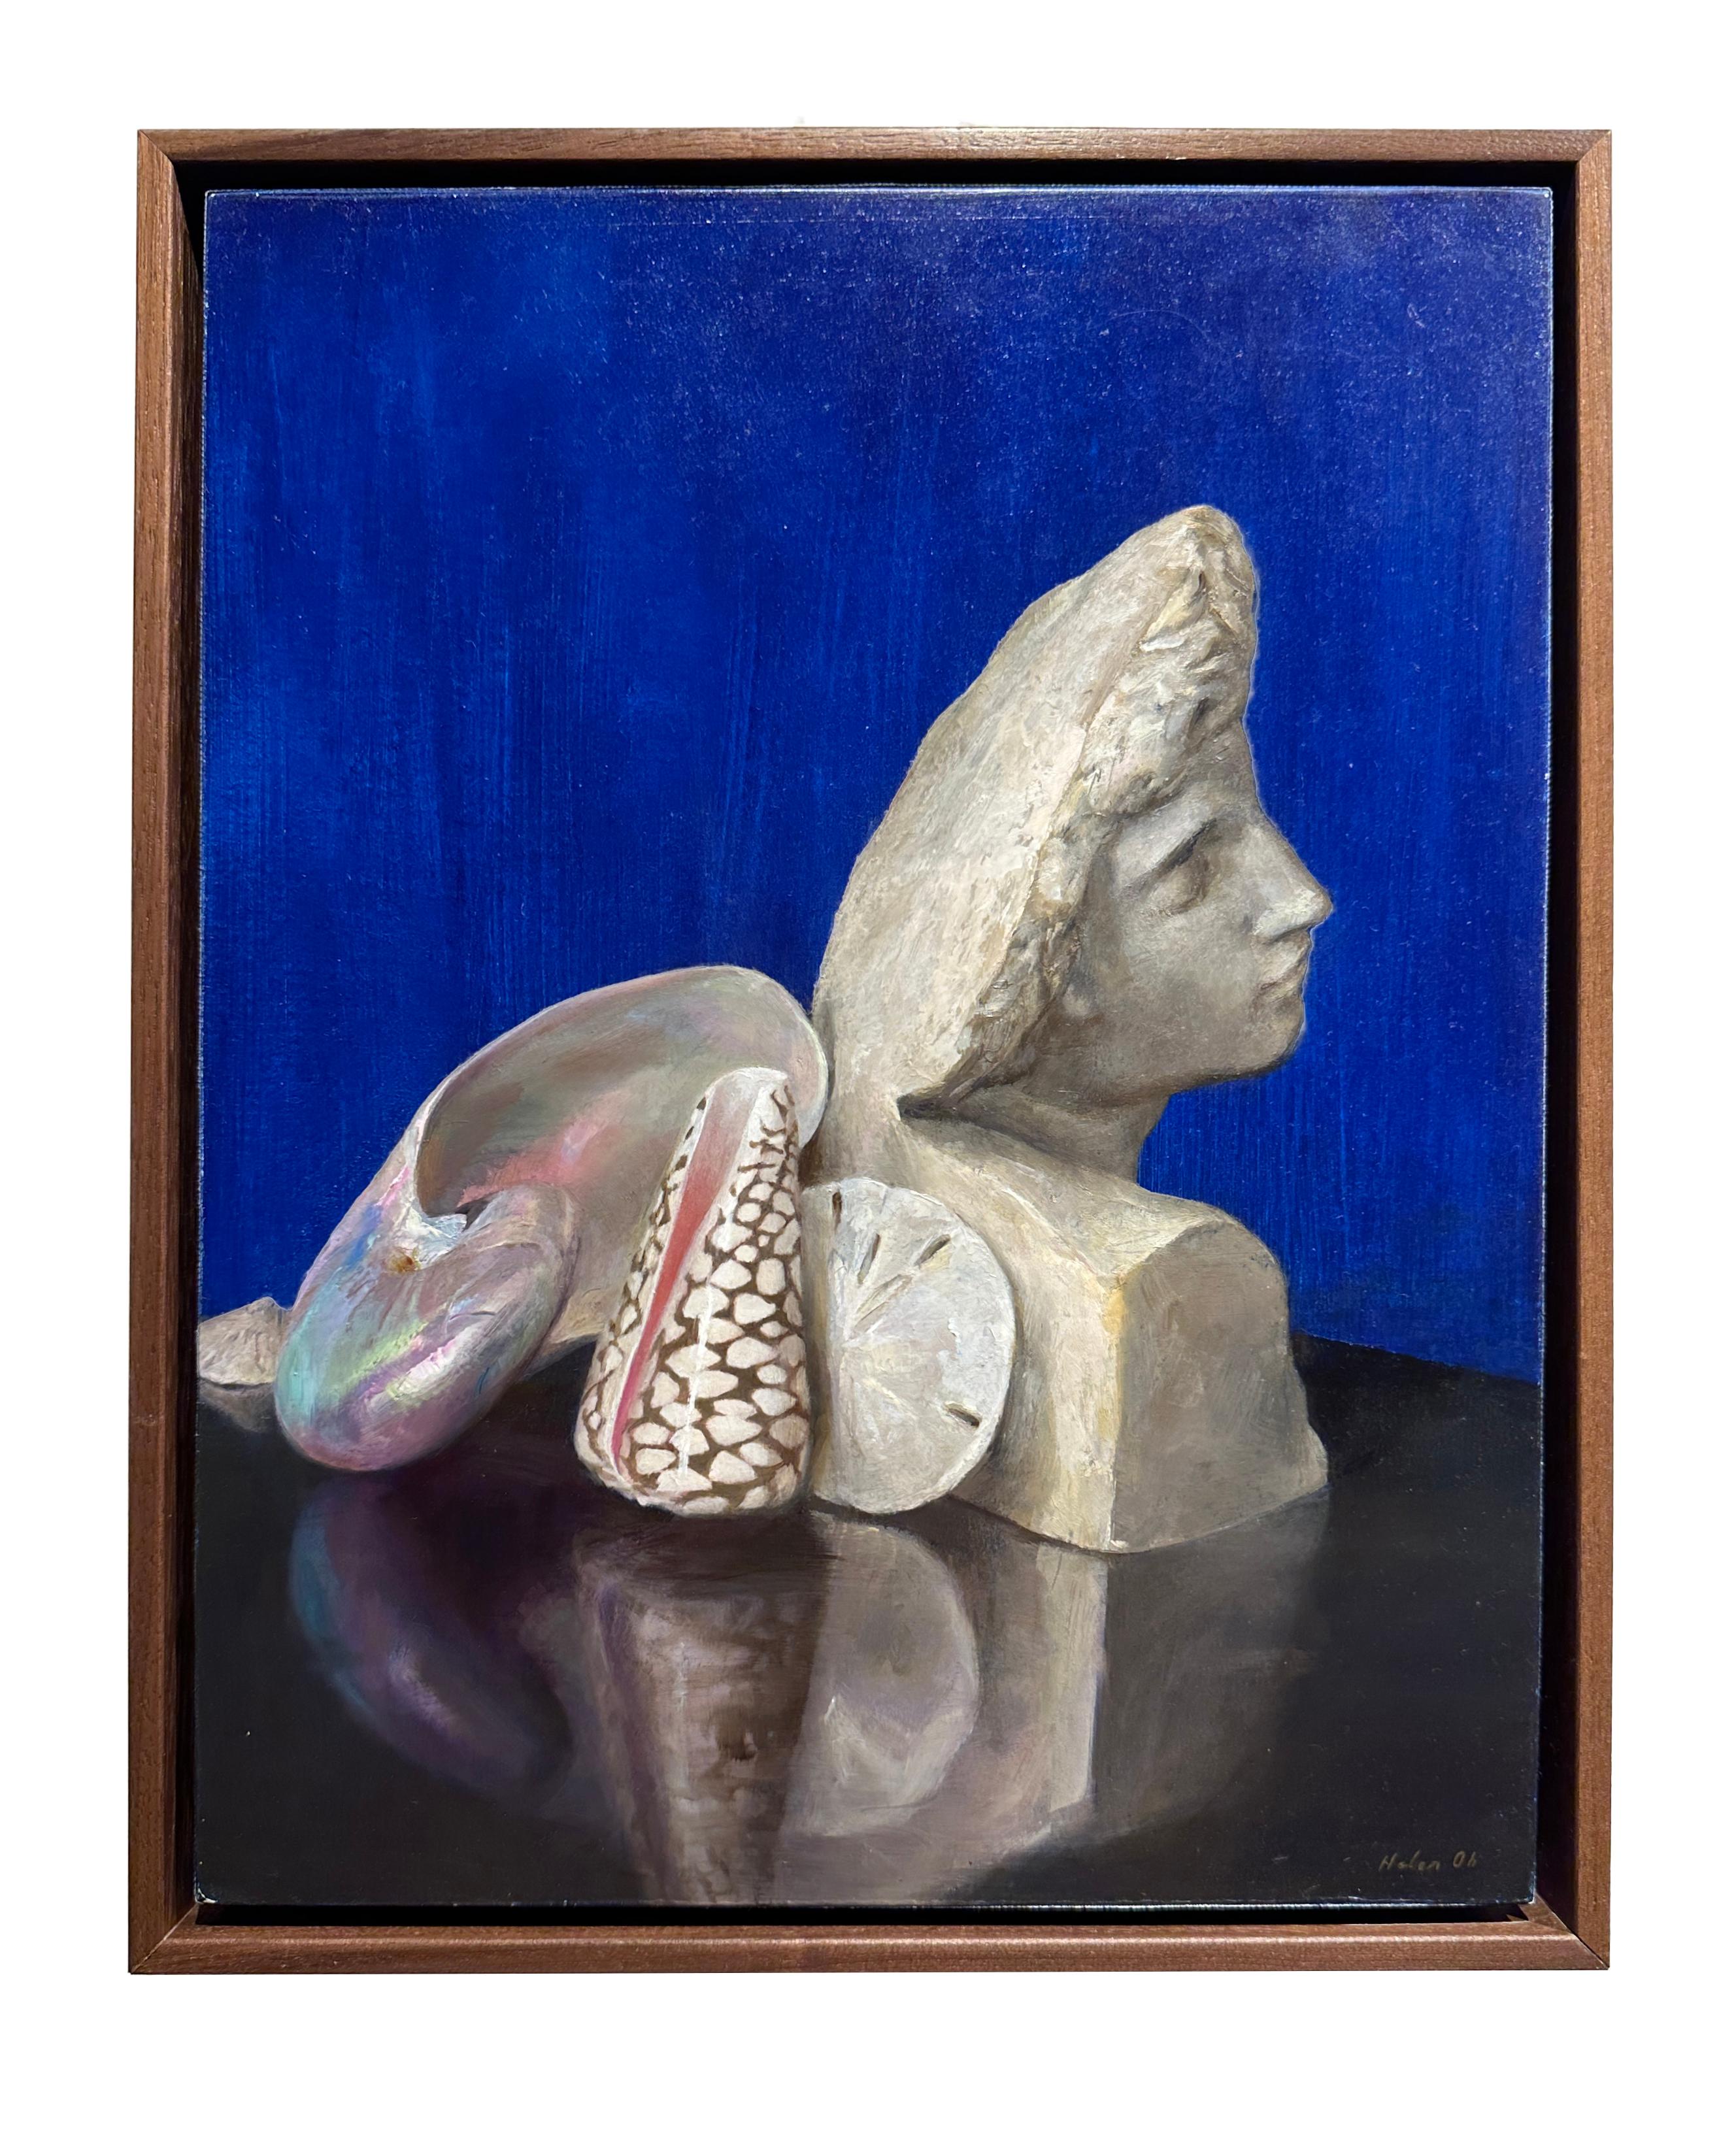 This delicately rendered still life painting is a collection of seashells leaning on a marble bust. Set on a vibrant blue background, the composition is designed to emphasize the shapes and textures of the shells. The opalescence of the abalone,